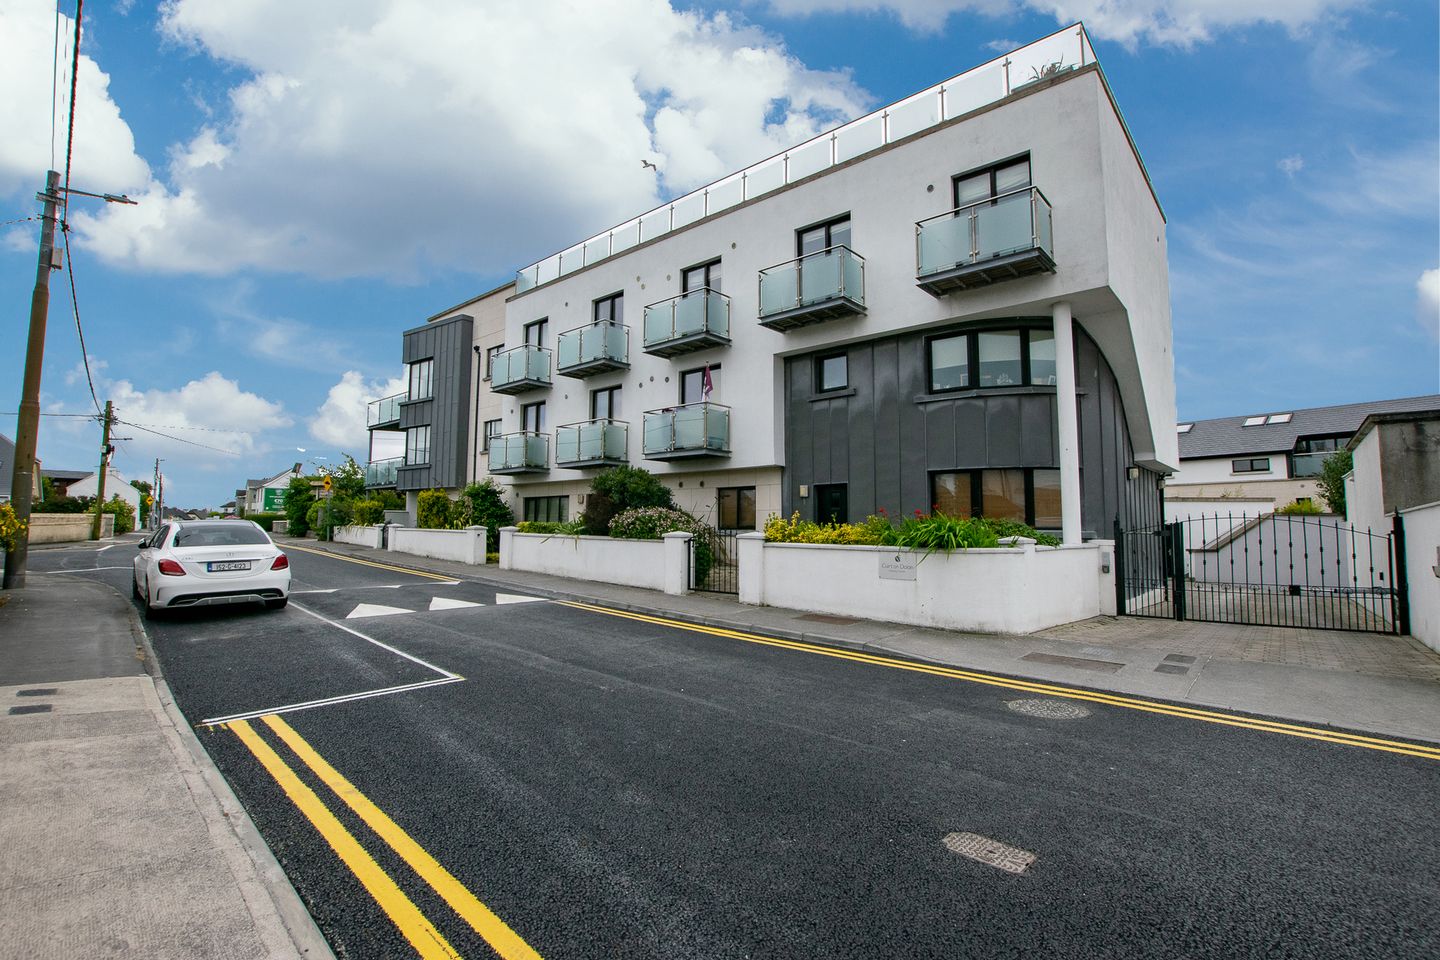 Apartment 4, Fairhill Court, Fairhill Road Upper, Galway City, Co. Galway